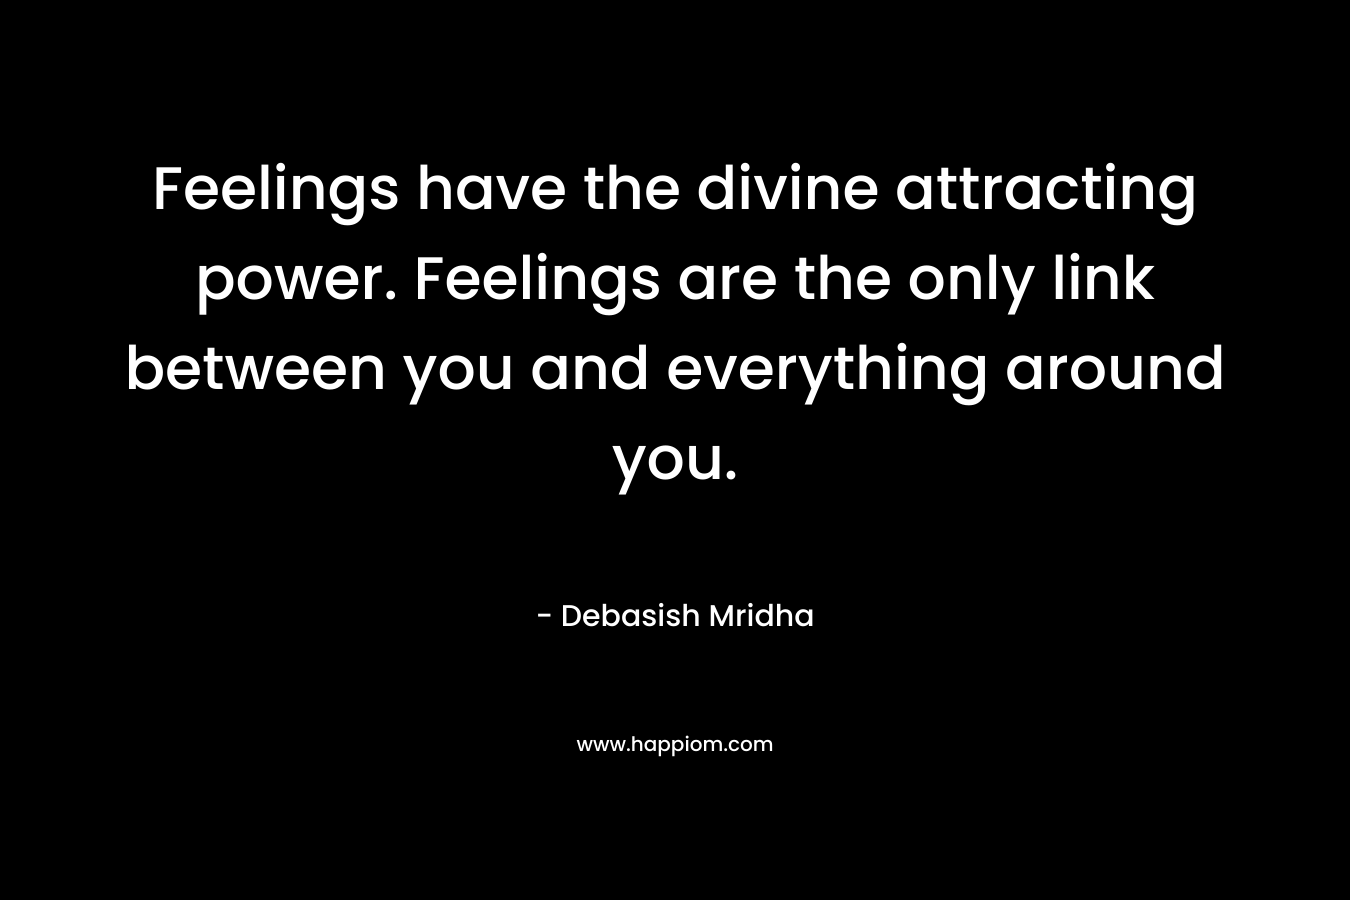 Feelings have the divine attracting power. Feelings are the only link between you and everything around you.